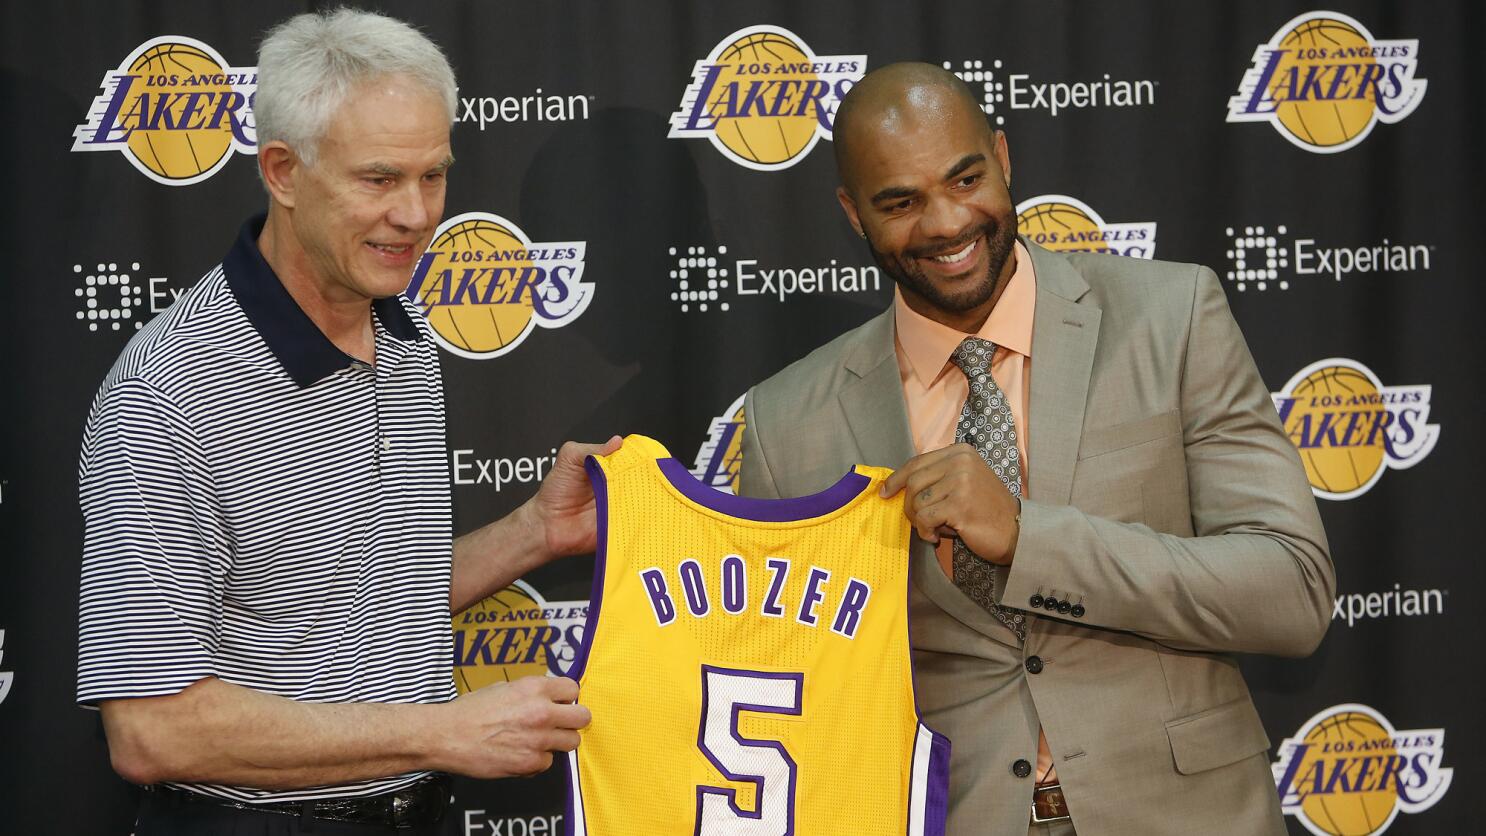 Los Angeles Lakers general manager Mitch Kupchak, (L) poses with